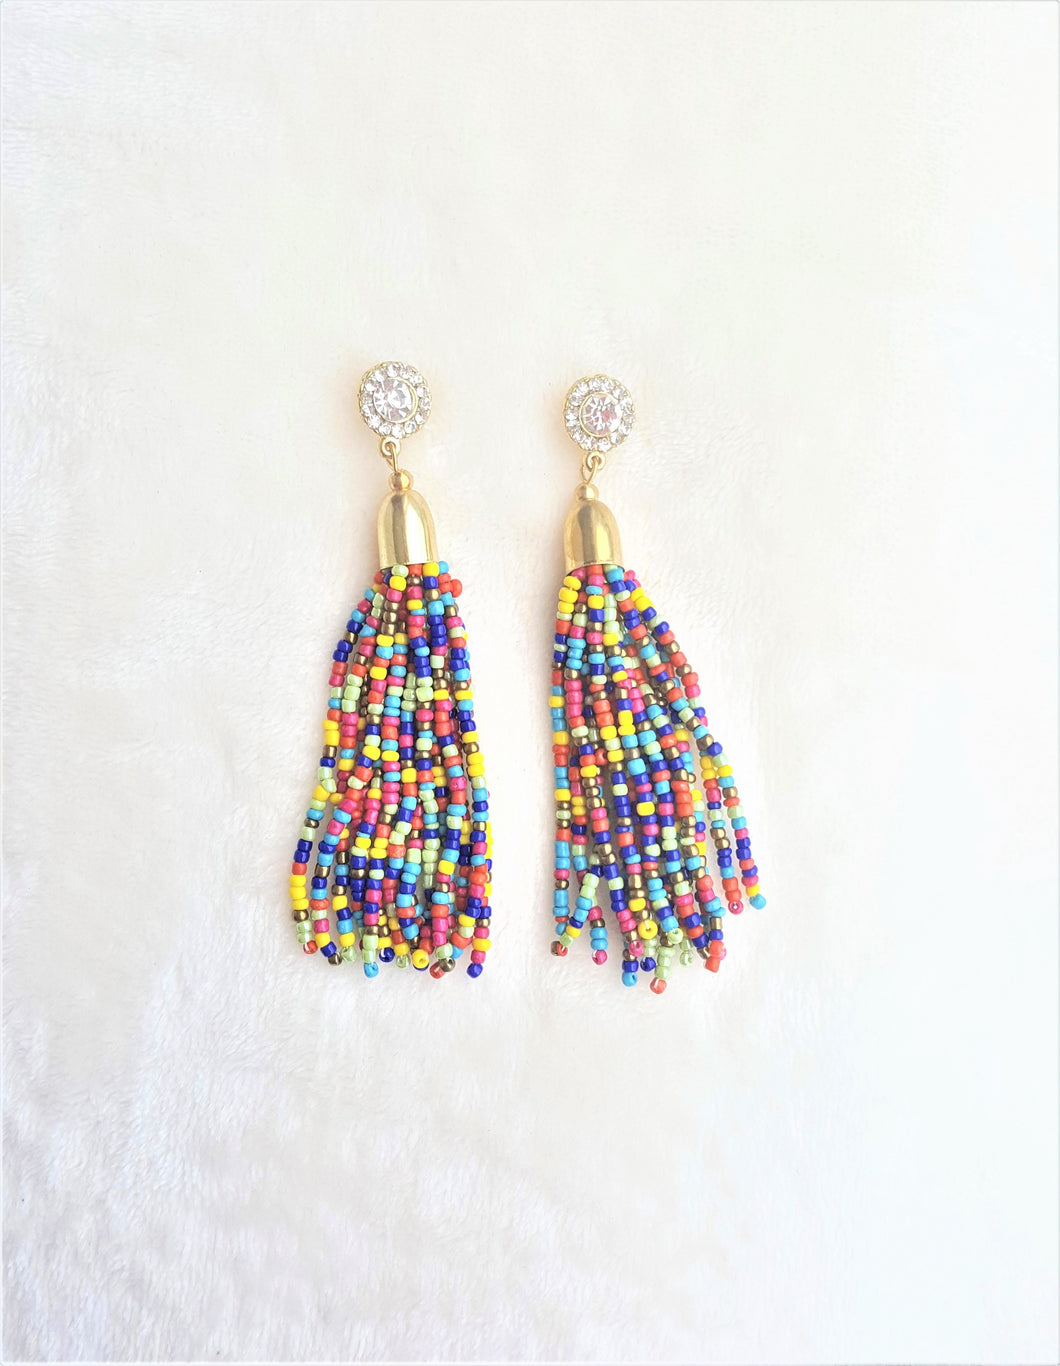 Beaded Tassel Earrings Crystal Rhinestone Stud Multicolored Gold, Boho Chic Designer Jewelry, Statement Earring,Gift for Her by UrbanFlair - Urban Flair USA